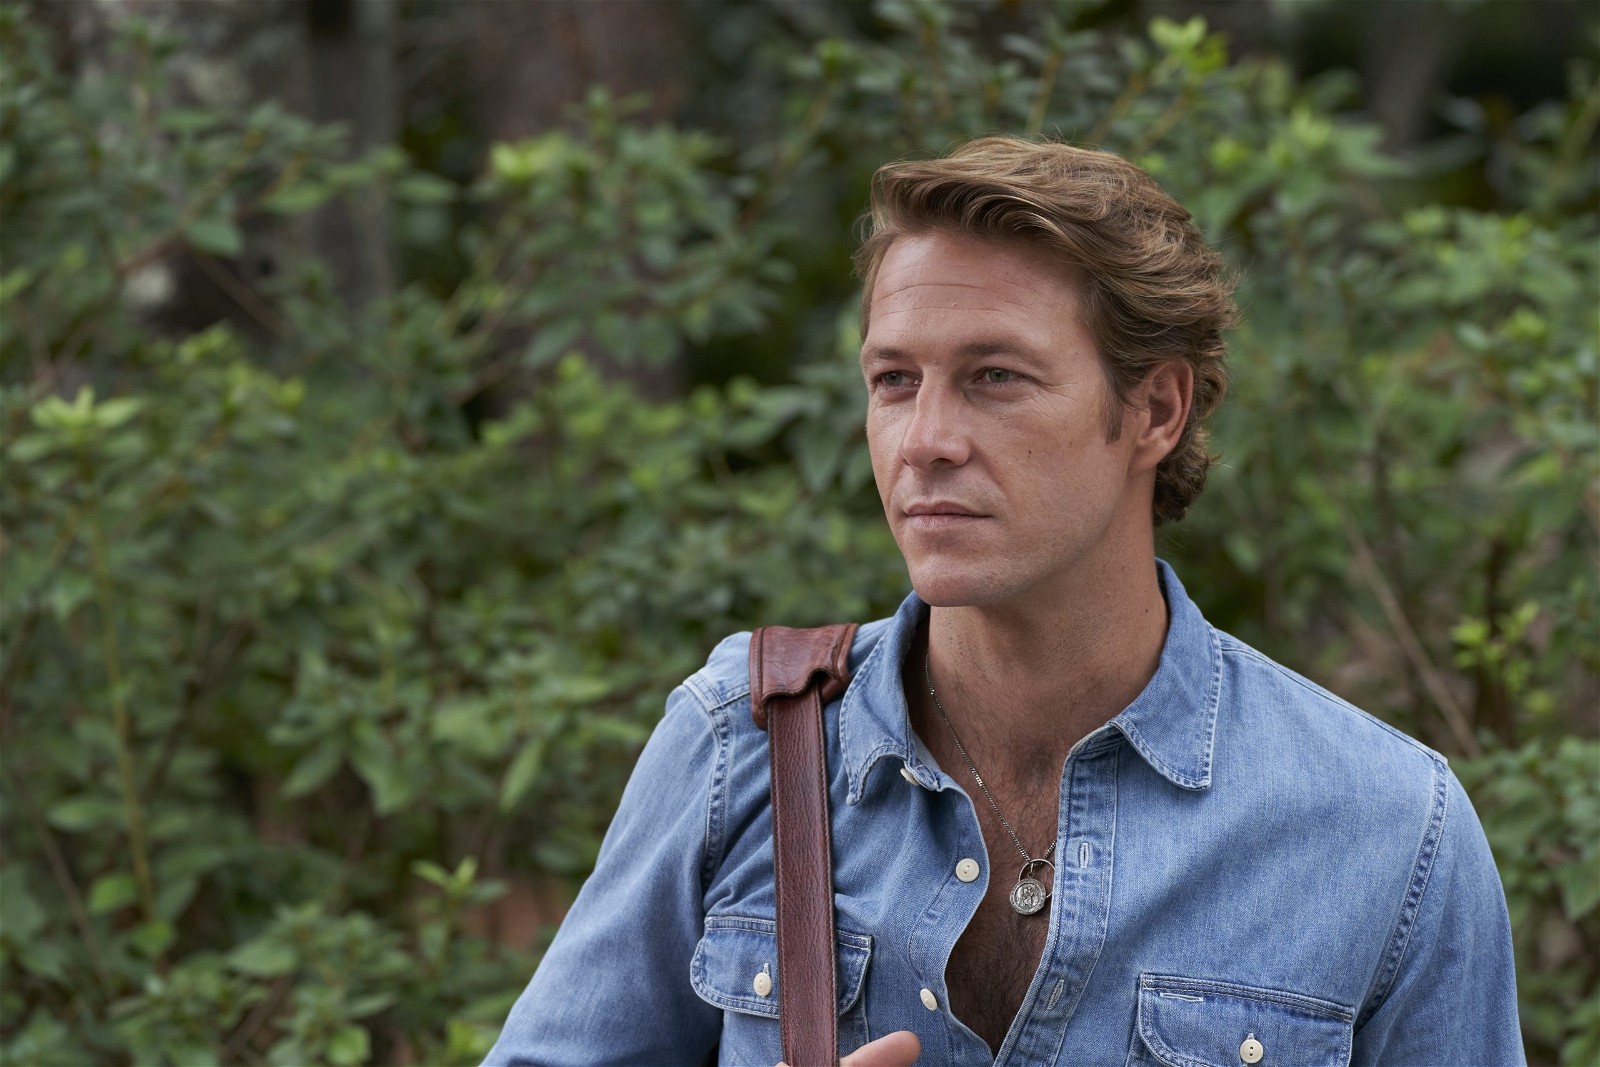 Luke Bracey as “Jesse” in the romance/drama/comedy film, ONE TRUE LOVES, a The Avenue release. Photo courtesy of The Avenue.